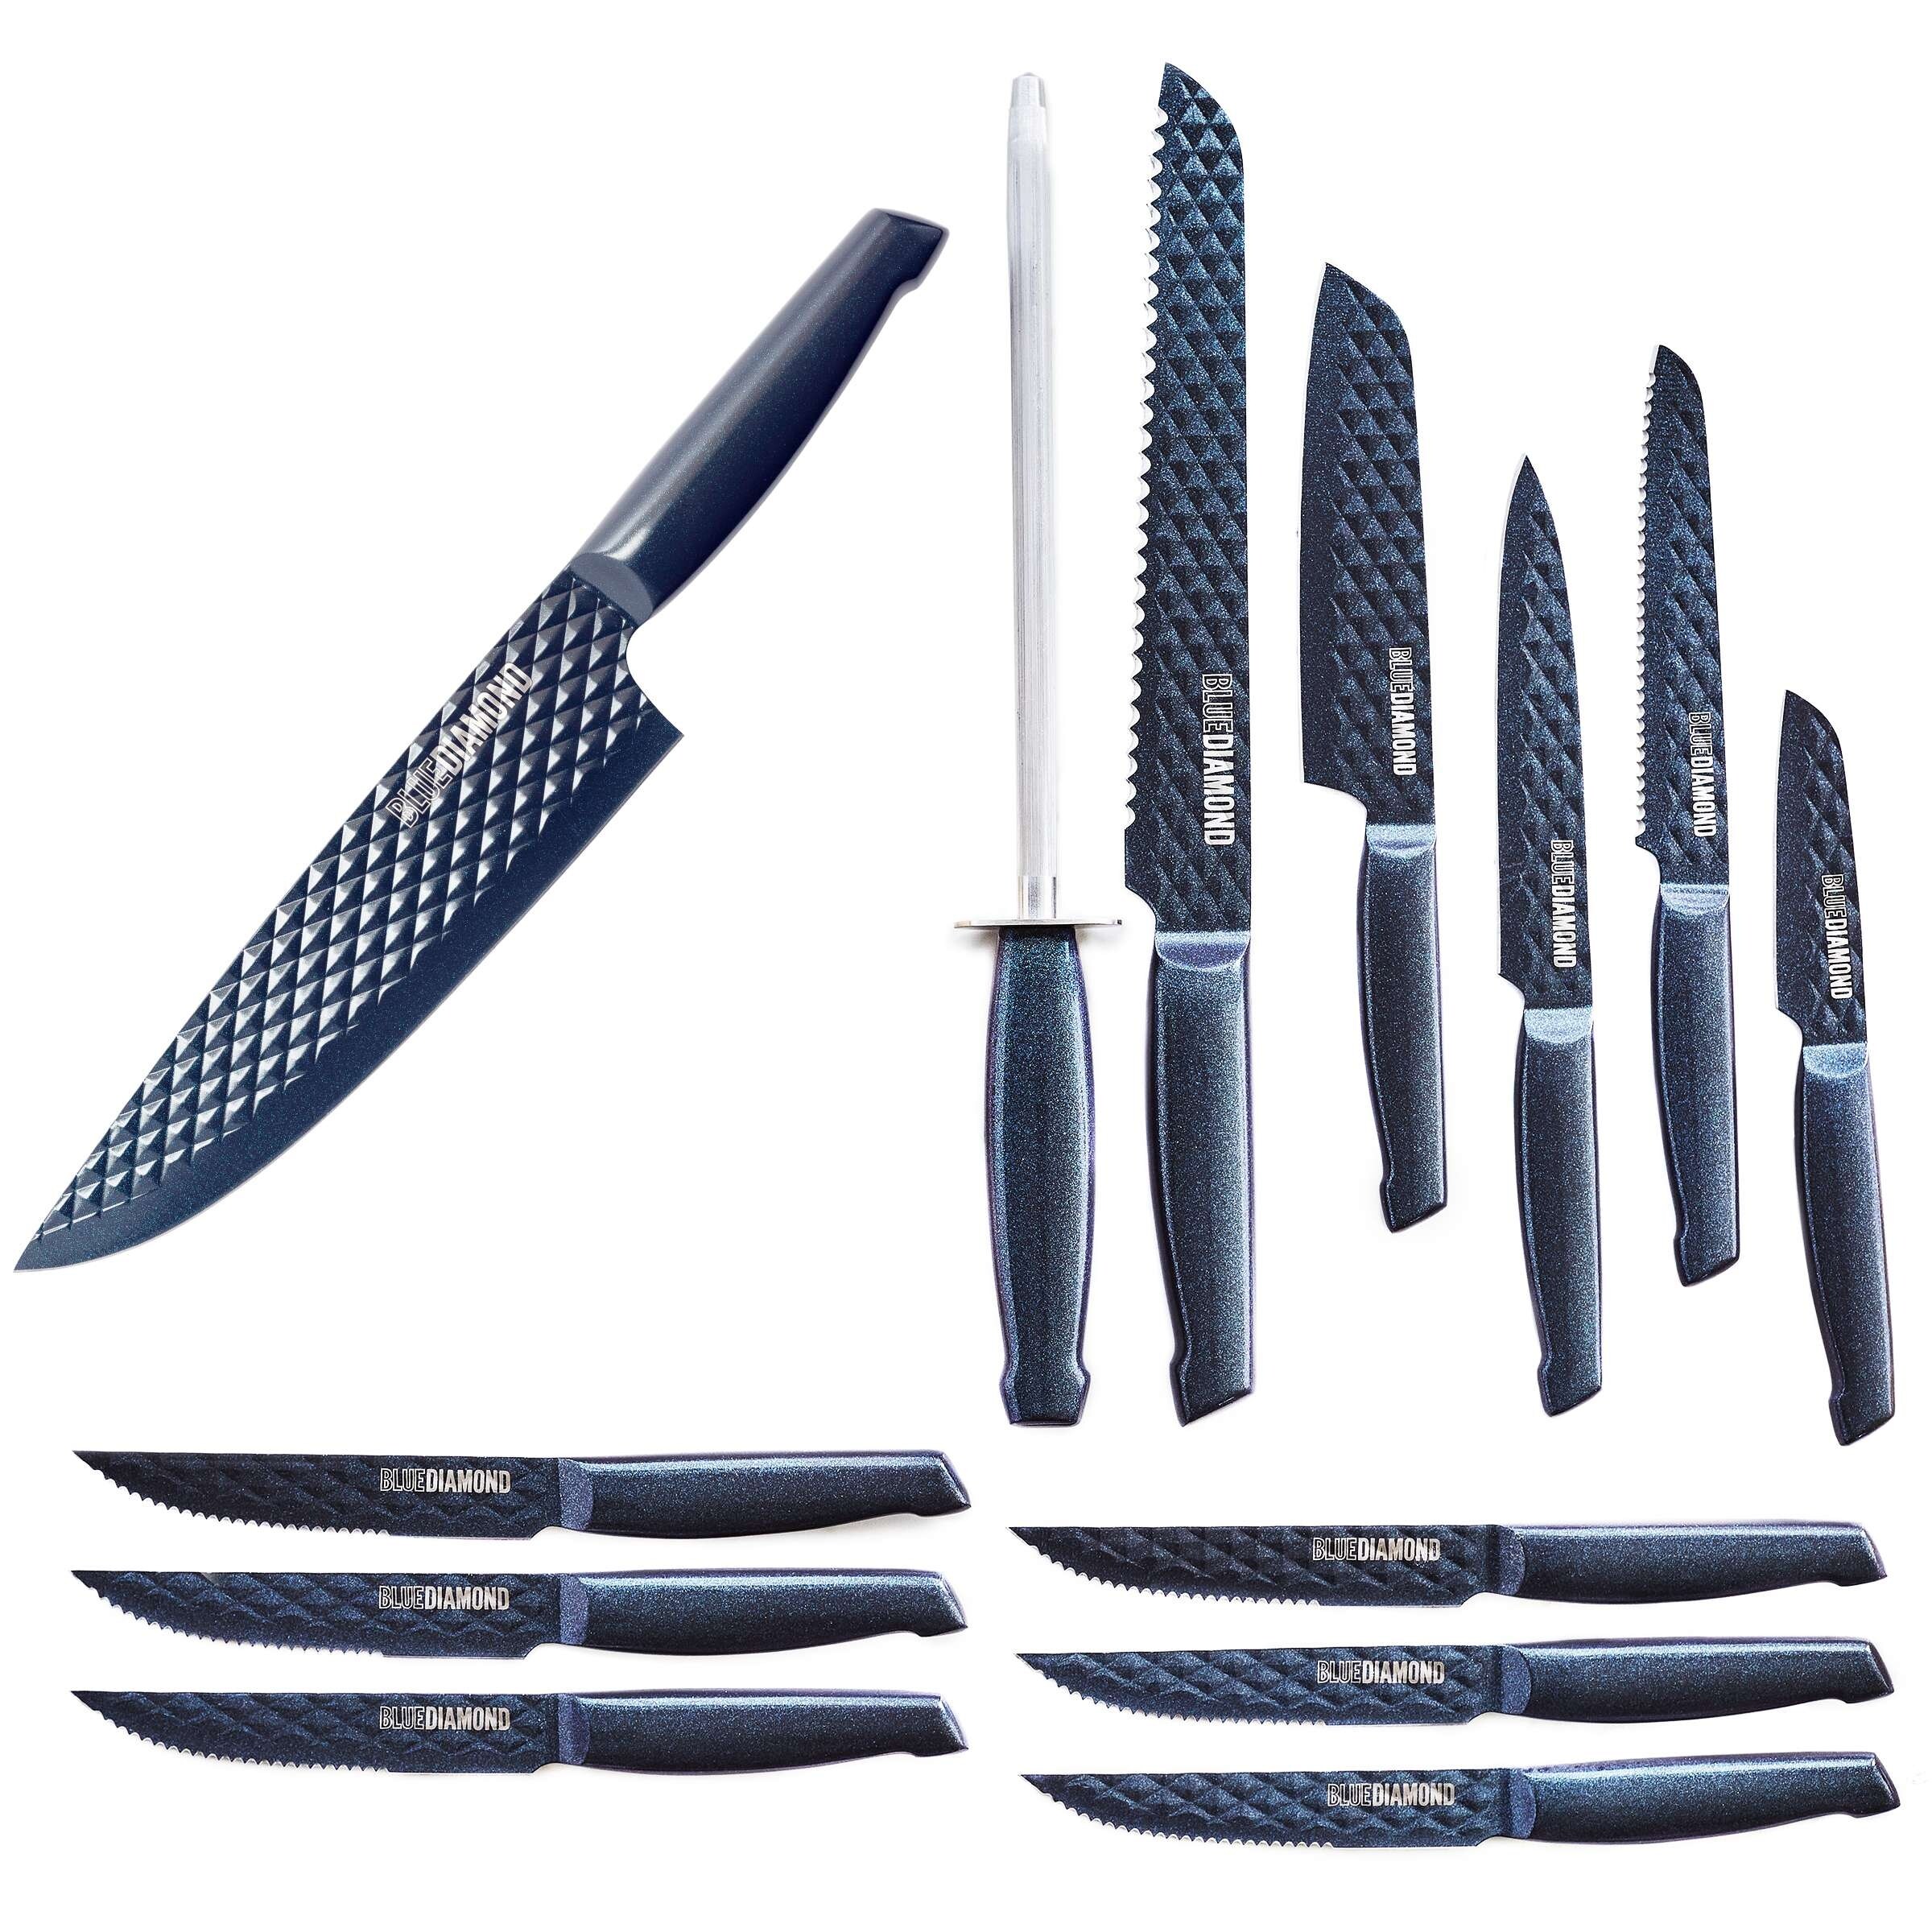 https://ak1.ostkcdn.com/images/products/is/images/direct/7e35a389725d81c11e38623b1862ea2a6a581b2f/Blue-Diamond-14pc-Knife-Block-Set.jpg